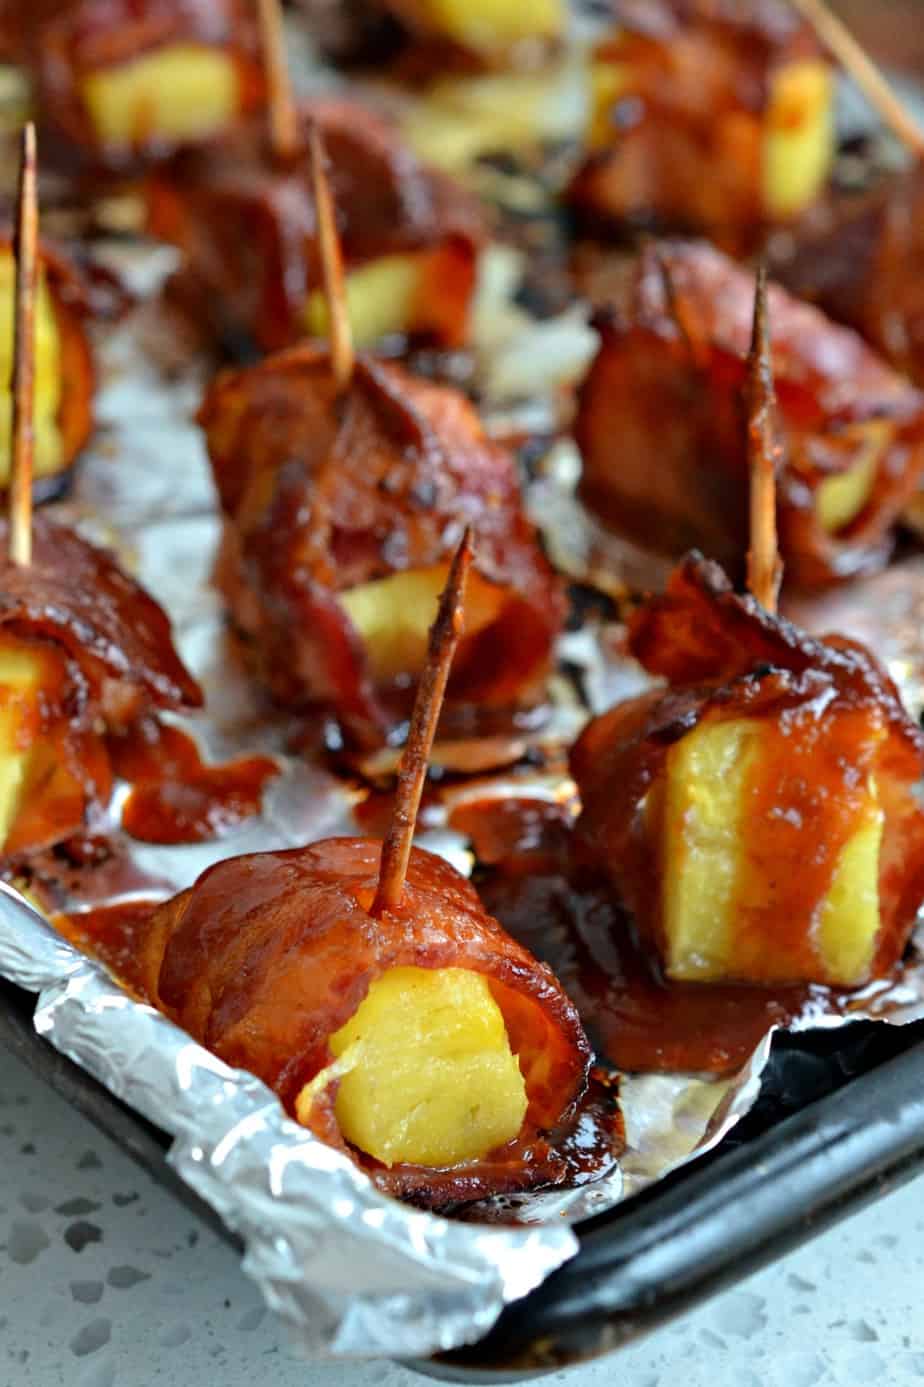 Then baste the bacon-wrapped pineapple after 20 minutes and cook for an additional 10 minutes or until the bacon is crispy and the pineapple is heated through. 